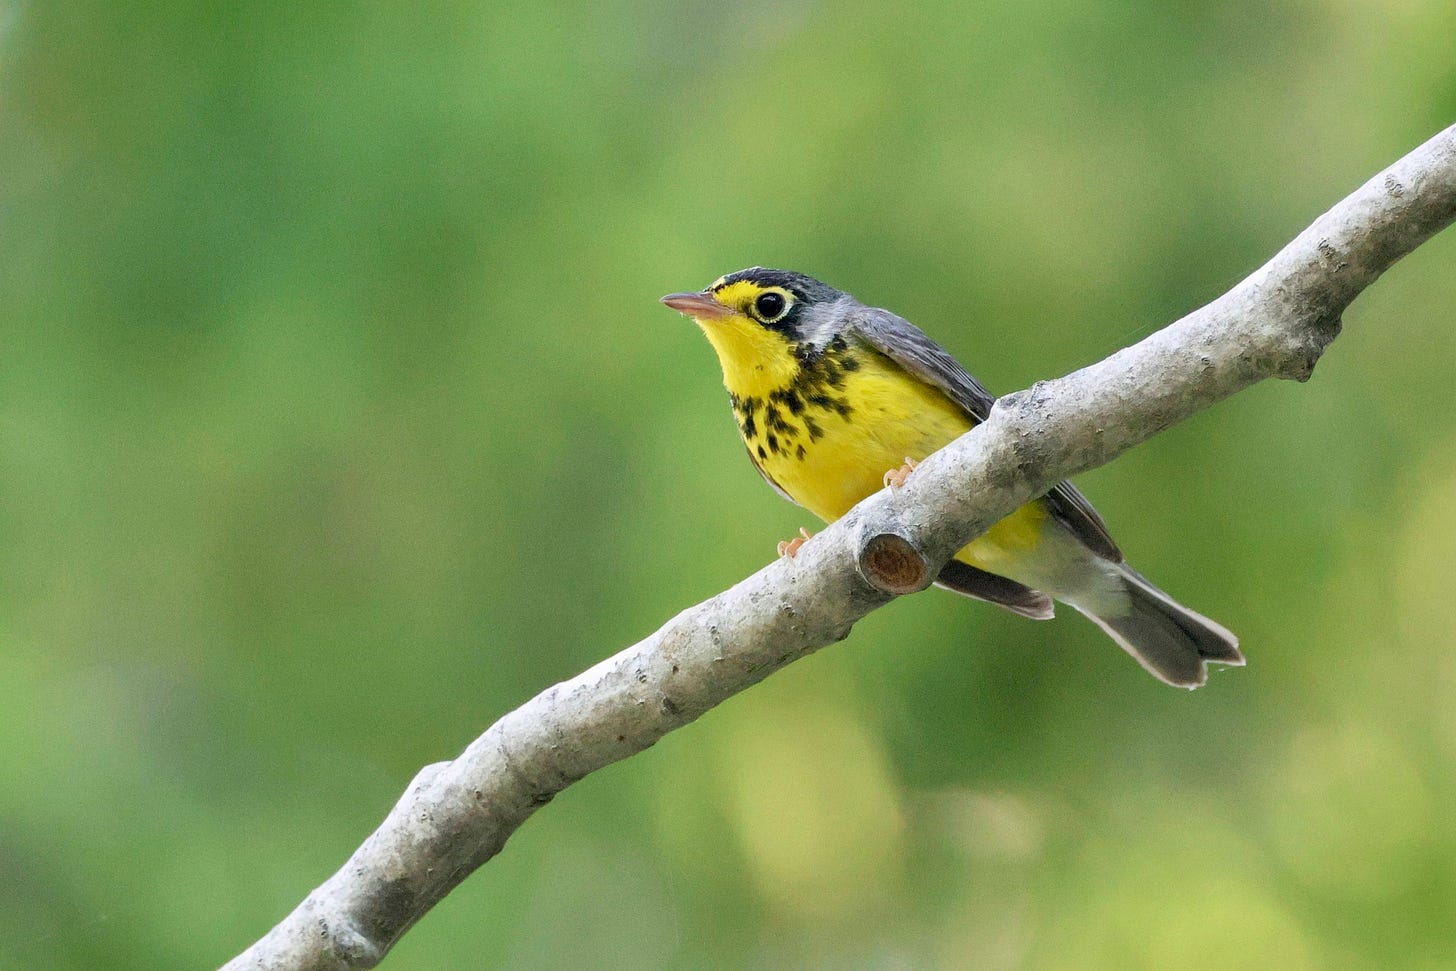 a small yellow-bellied songbird with a ecklace of black markigns and a white eyering, perched on a stick looking to the left set against a blurry pale green background